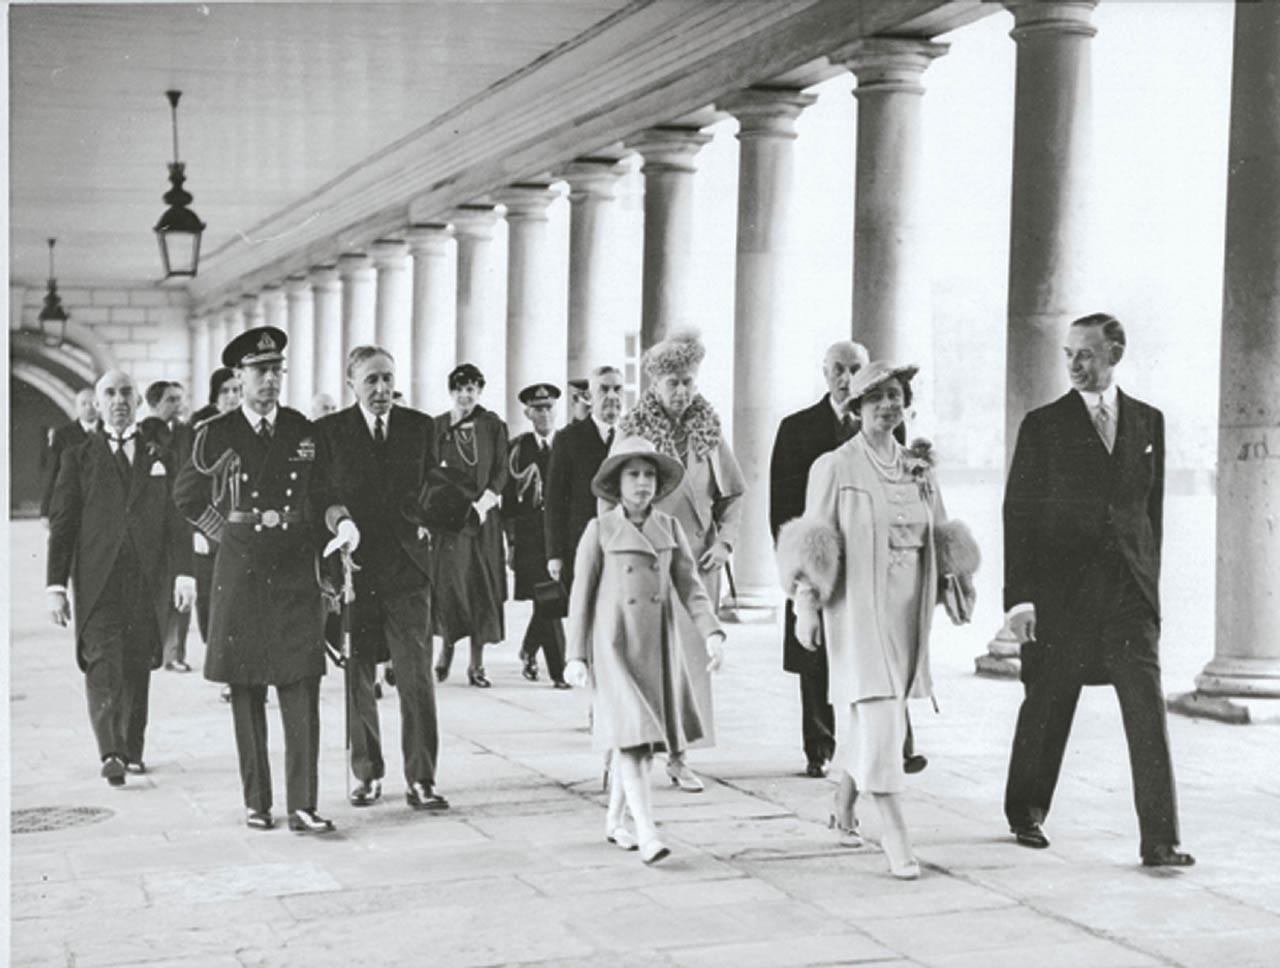 Historic photograph showing the official opening of the National Maritime Museum, with King George VI accompanied by the then-Princess Elizabeth